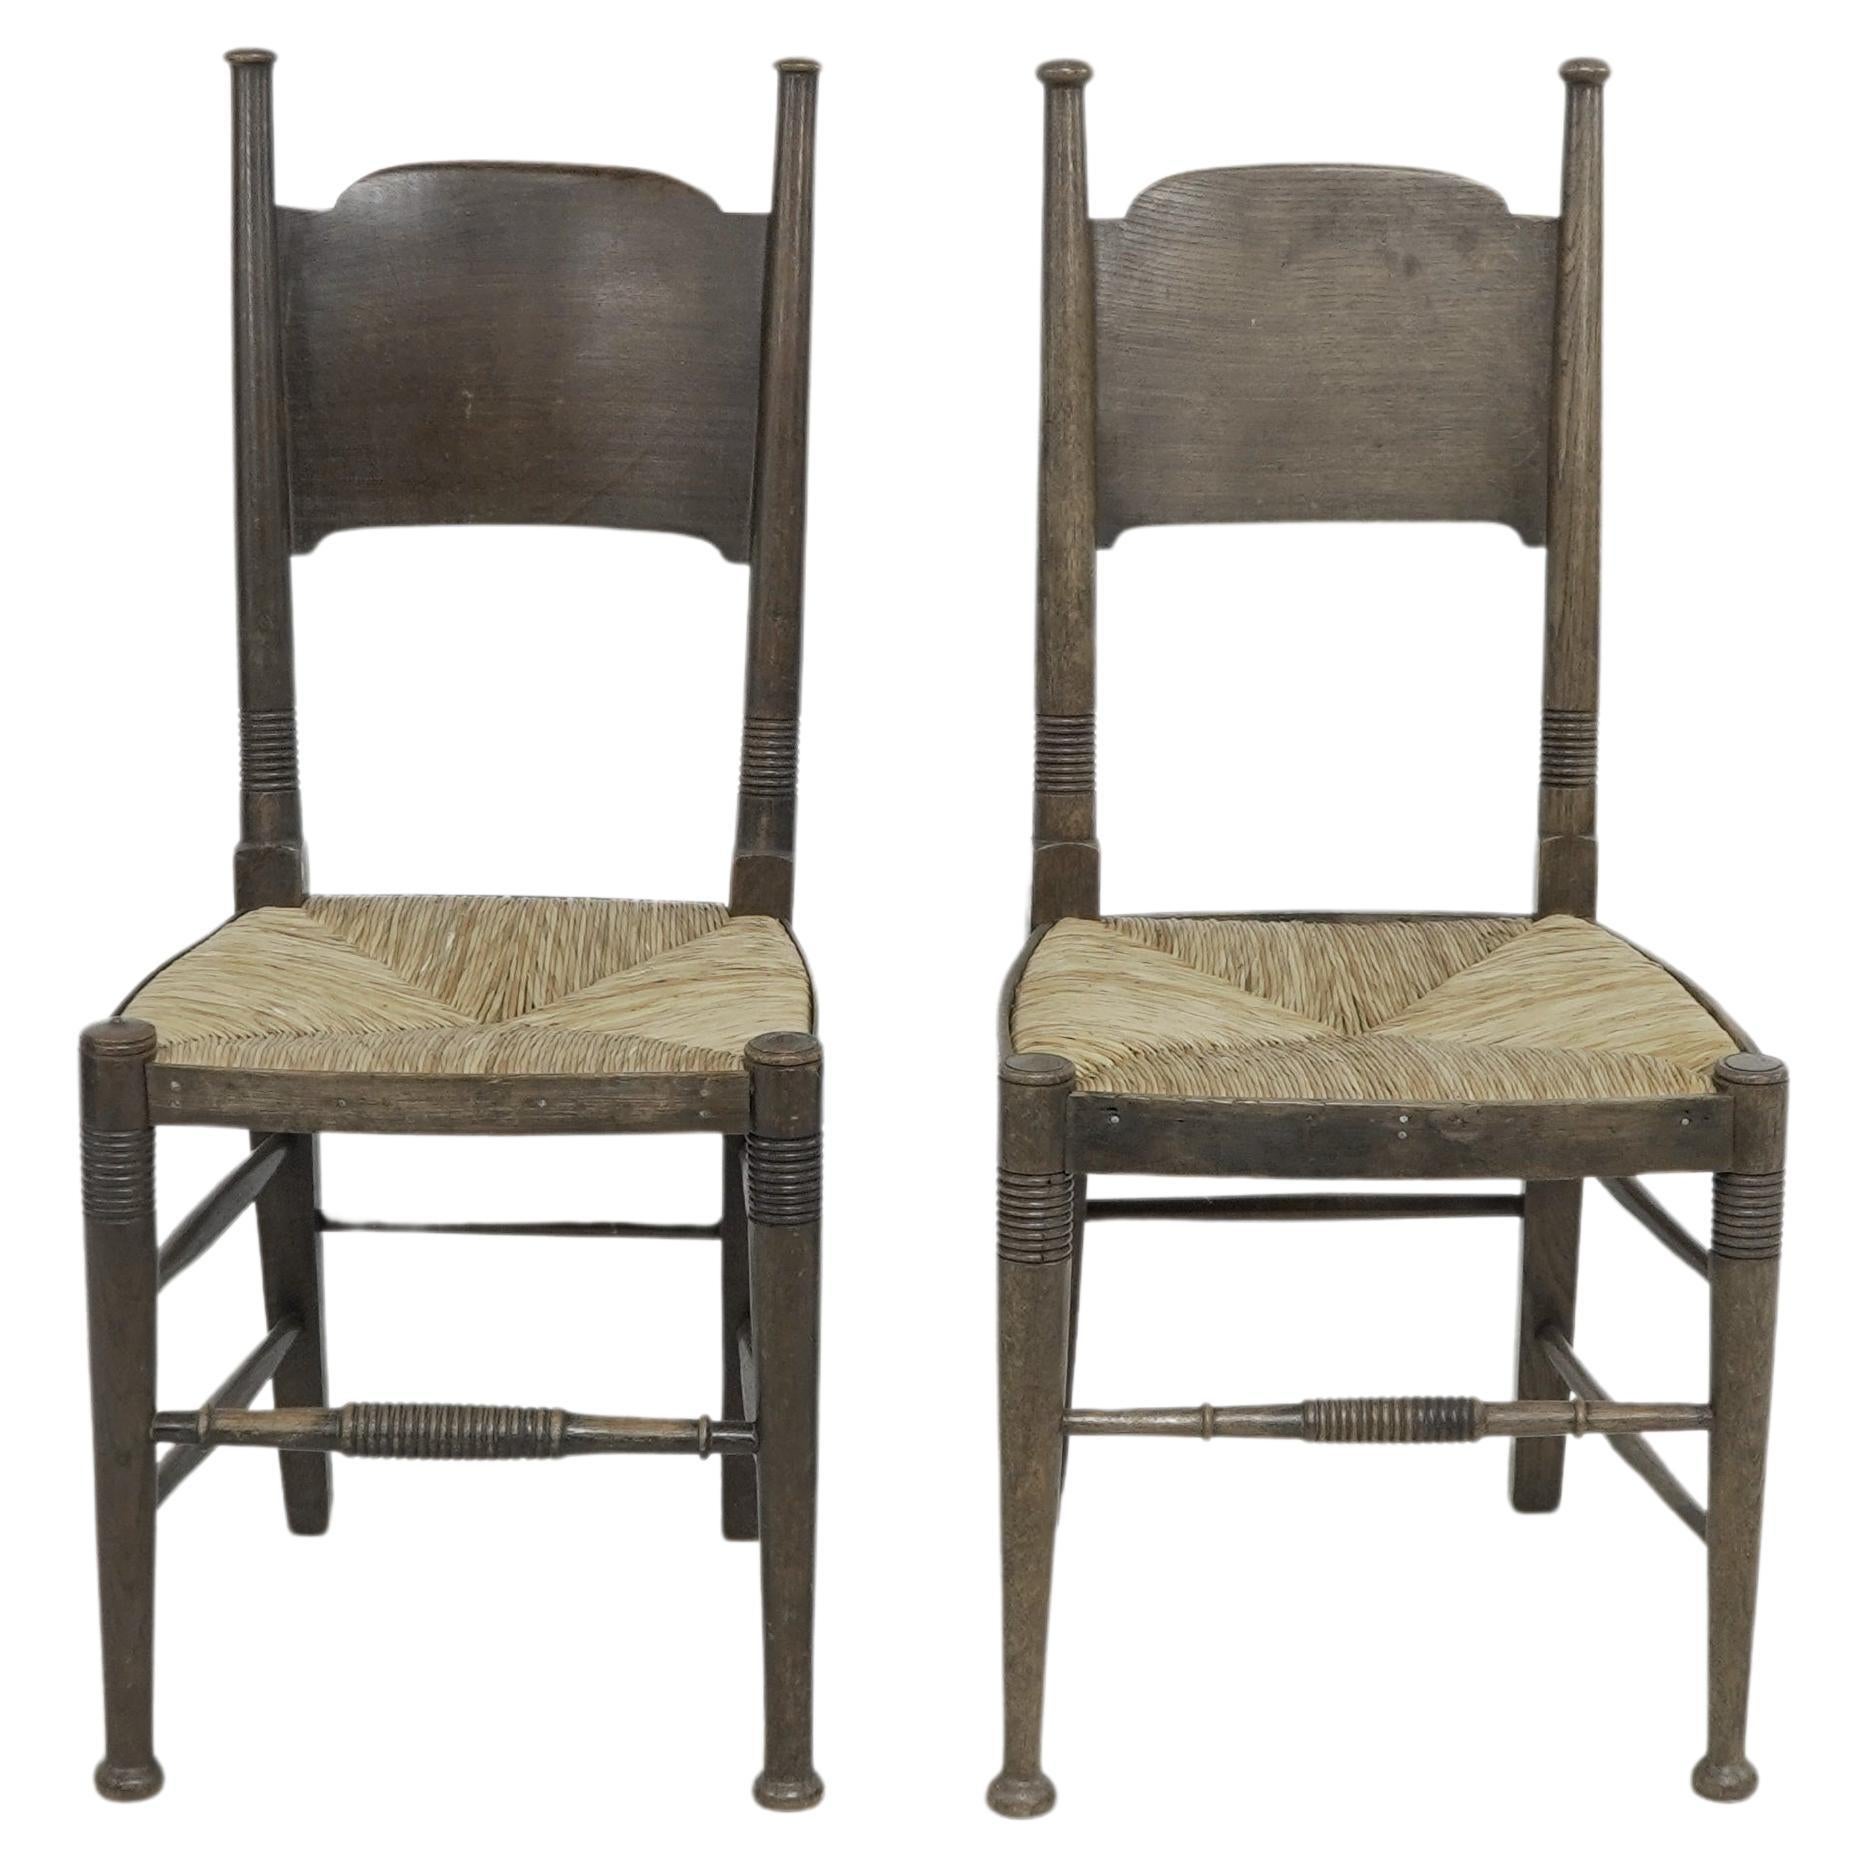 William Birch of High Wycombe. Liberty & Co retailer. 
A pair of Arts & Crafts rush seat oak dining or side chairs with a wide curved headrest and ring turned legs and front stretchers, retaining the original rush seat side protector strips. 
These